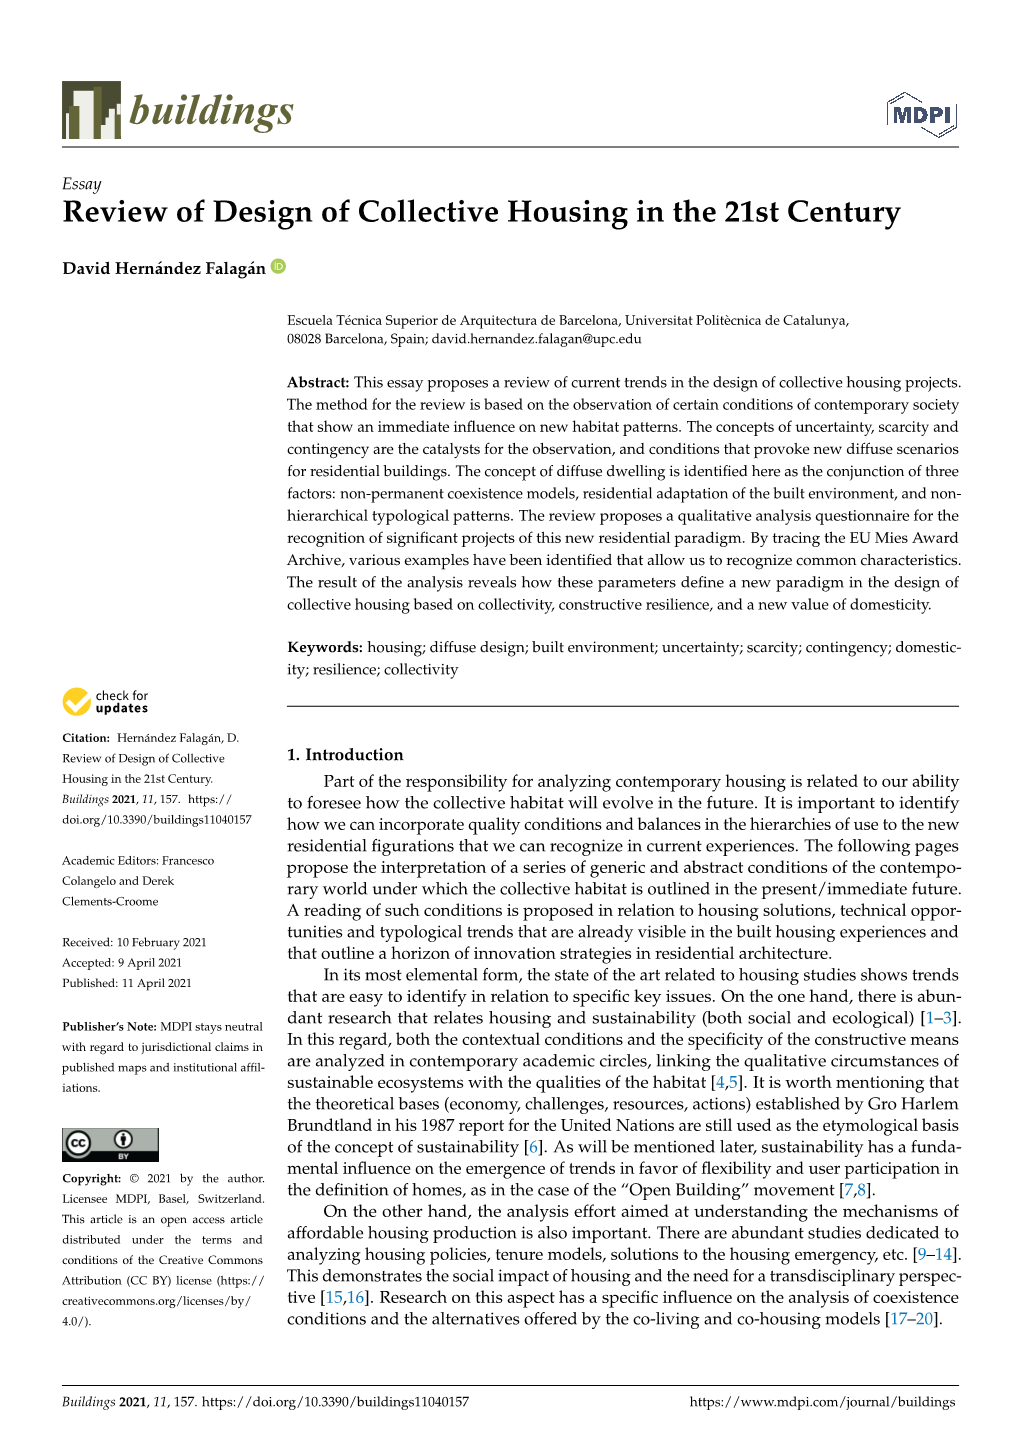 Review of Design of Collective Housing in the 21St Century